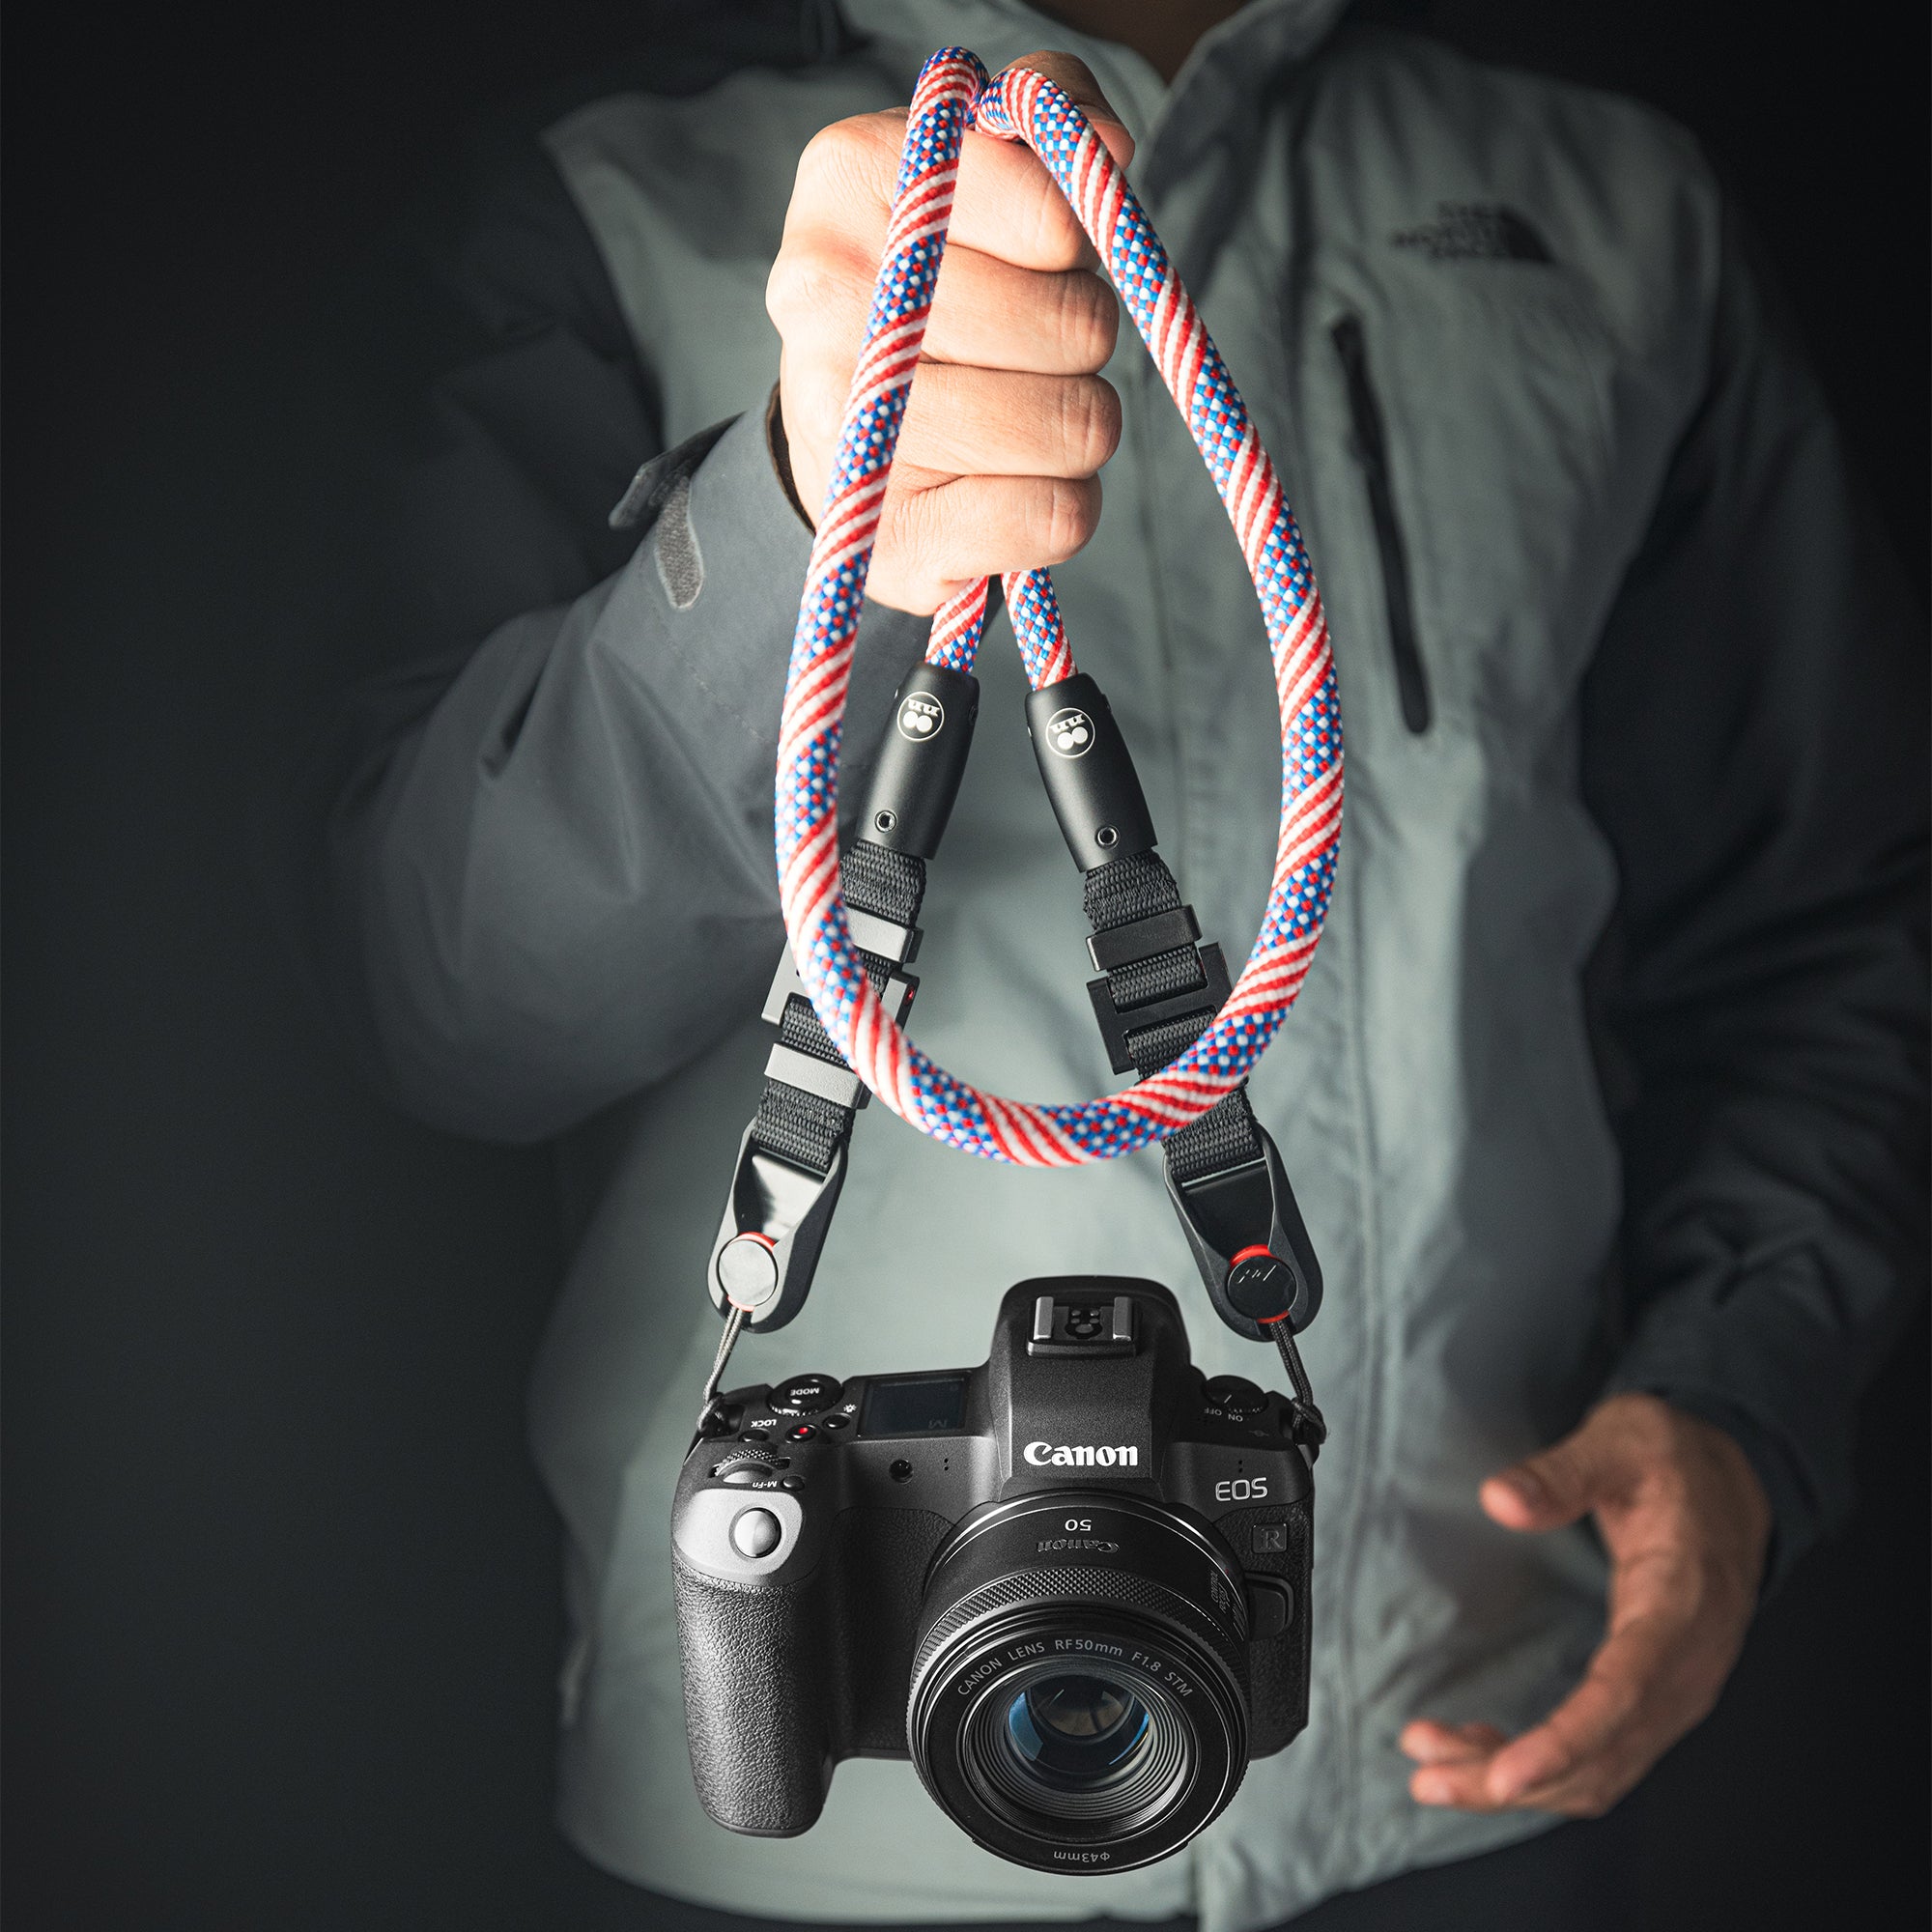 Custom Rope Camera Straps: Made by hand in the USA – Tuenne